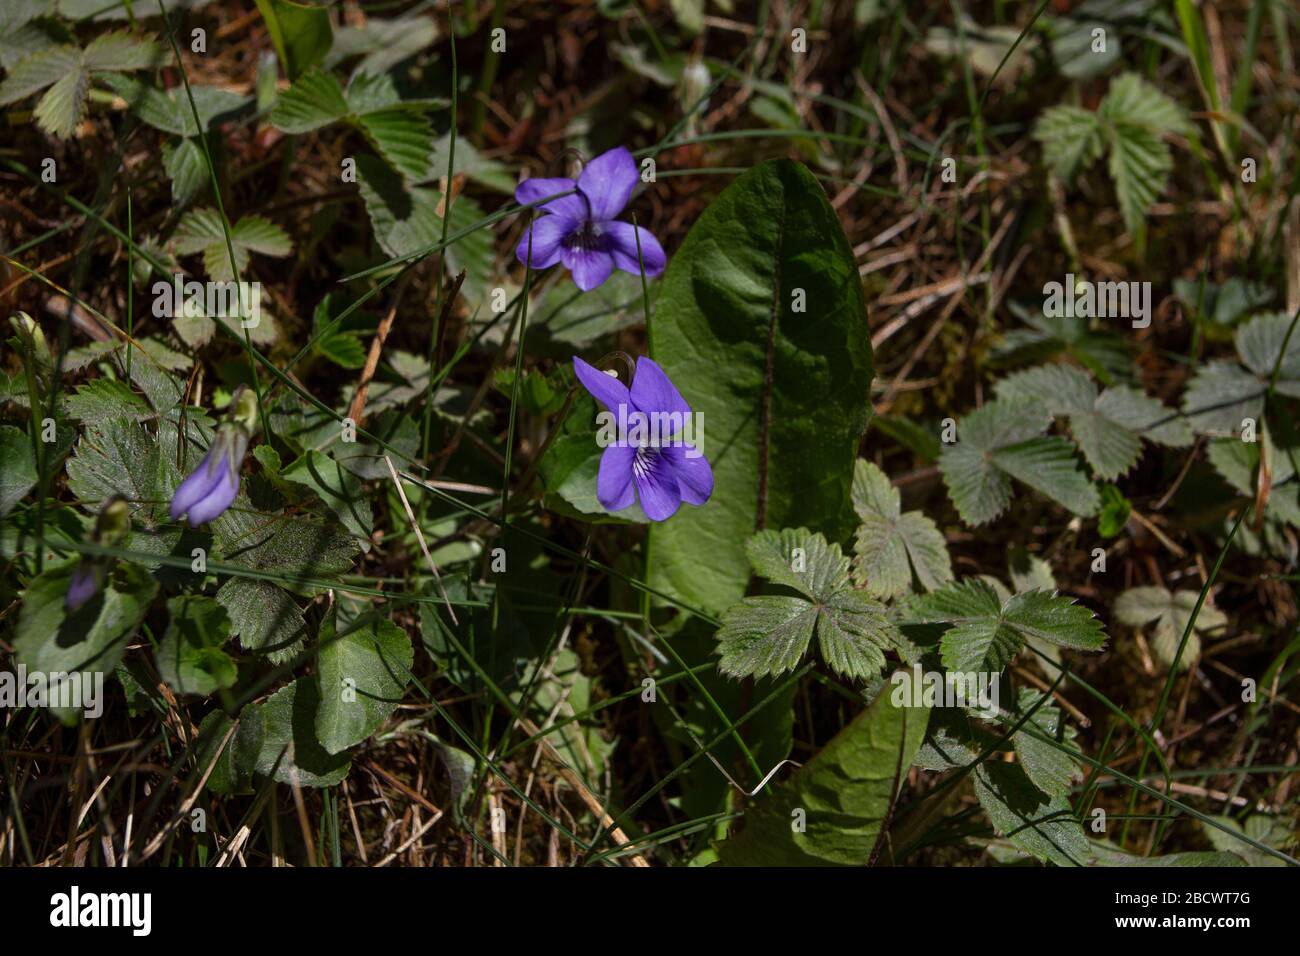 Dog violet, UK native perennial of deciduous woodland up to 20cm, flowers April to July, purple flower, white flower, Stock Photo